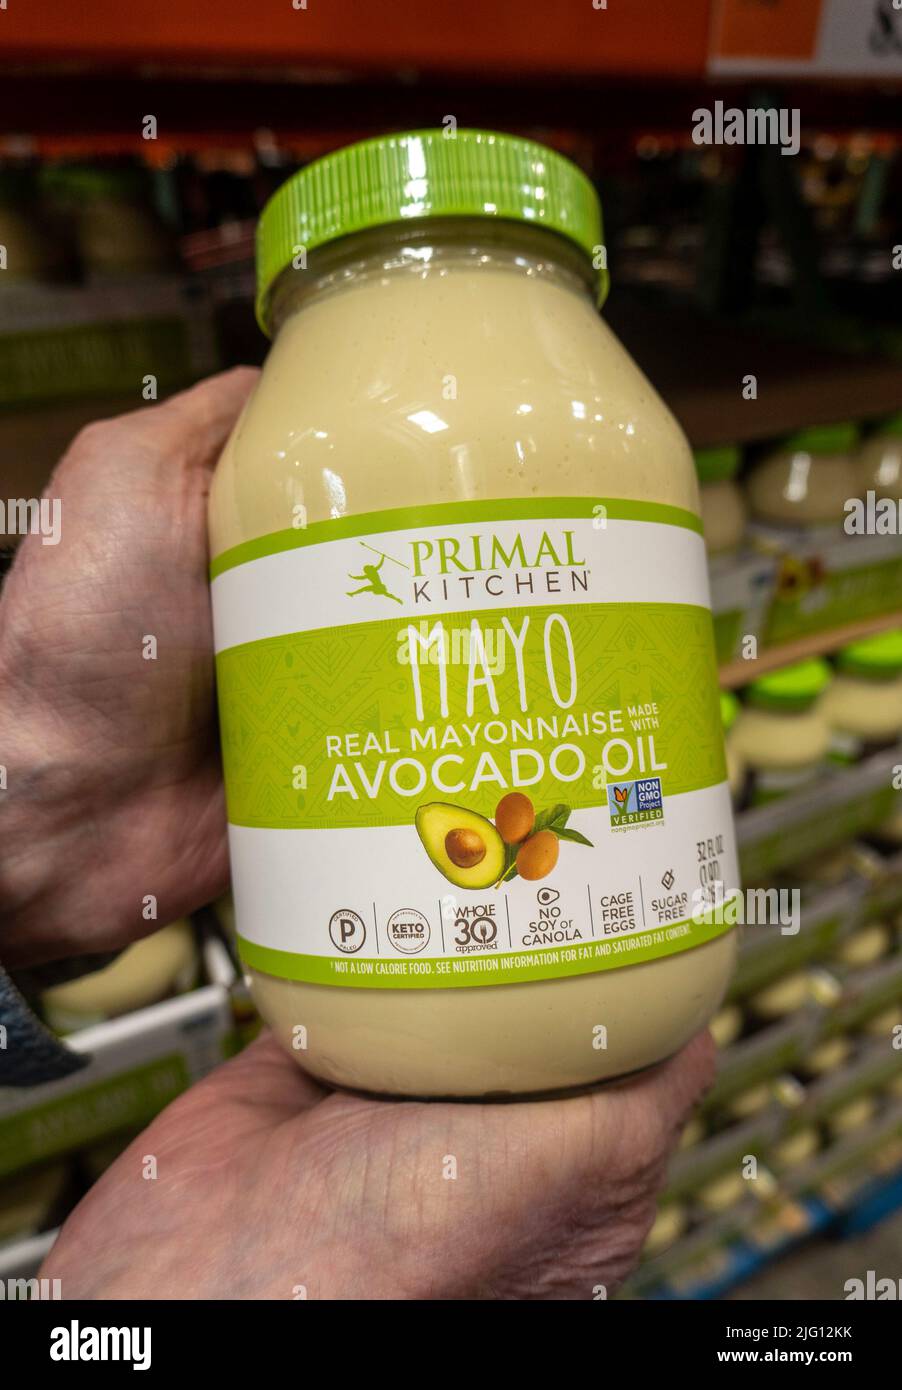 Primal Kitchen Avocado Mayonnaise. From plastic jar to glass jar. Why? :  r/Costco